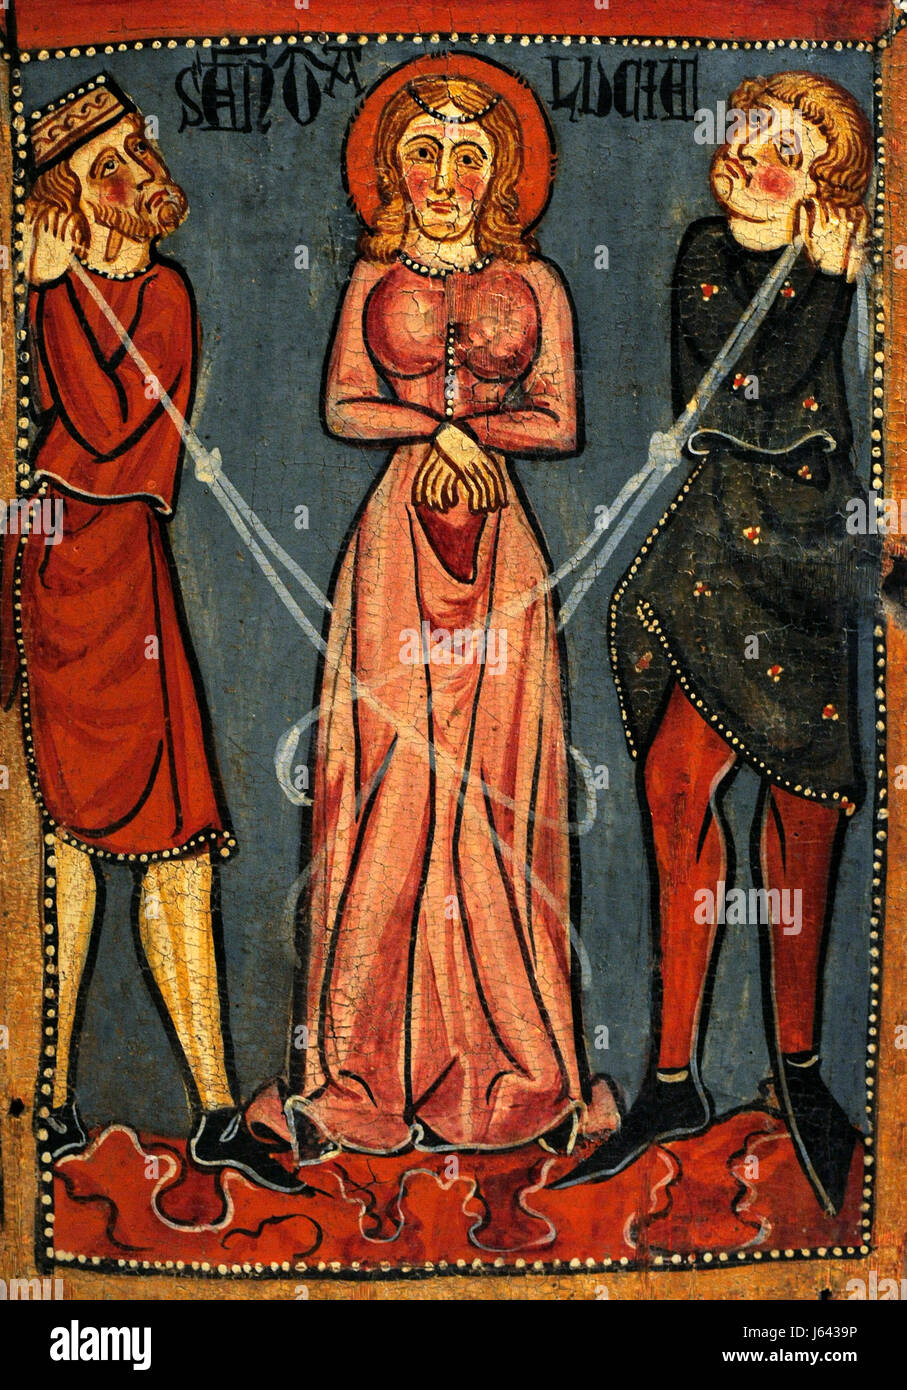 Anonymous. Catalonia. Panels with scenes of the Martyrdom of Saint Lucy, ca.1300. Detail depicting the immobility of Saint Lucy. From the Parish Church of Santa Llucia de Mur (Guardiola de Noguera, Catalonia). National Art Museum of Catalonia. Barcelona. Catalonia. Spain. Stock Photo